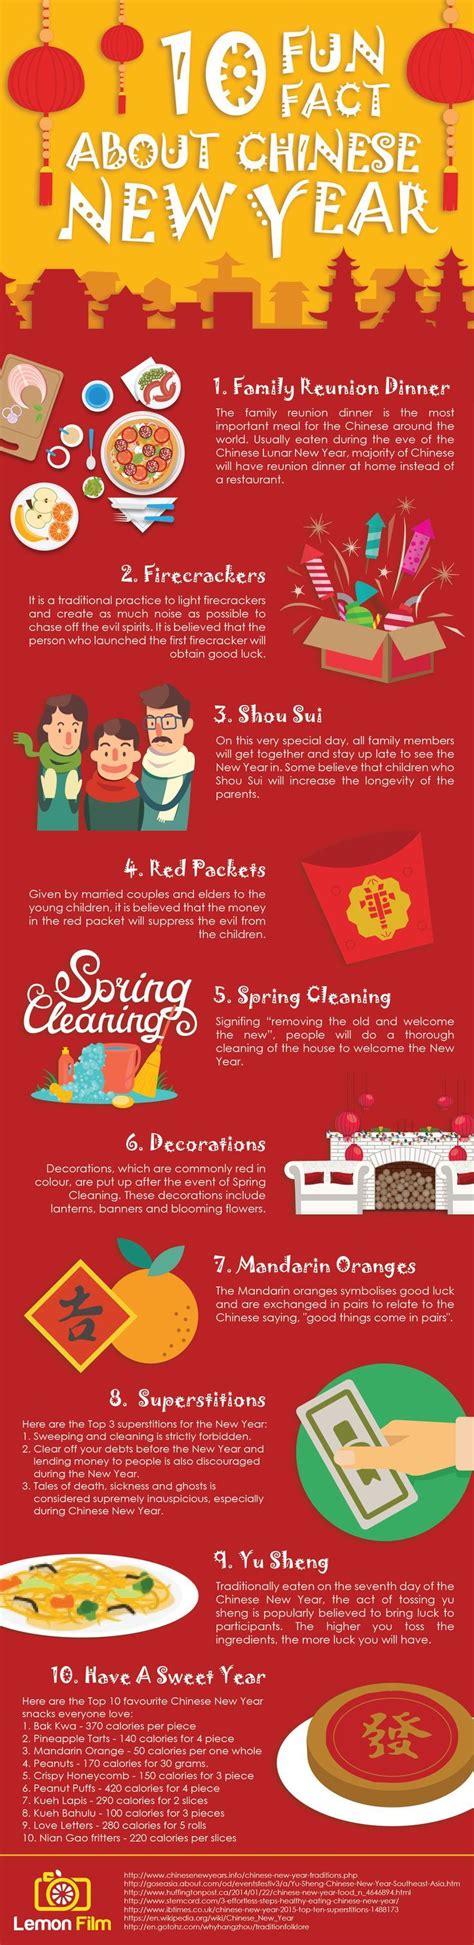 [infographic] From Traditions To Superstitions Here Are The 10 Fun Facts About Chinese New Year